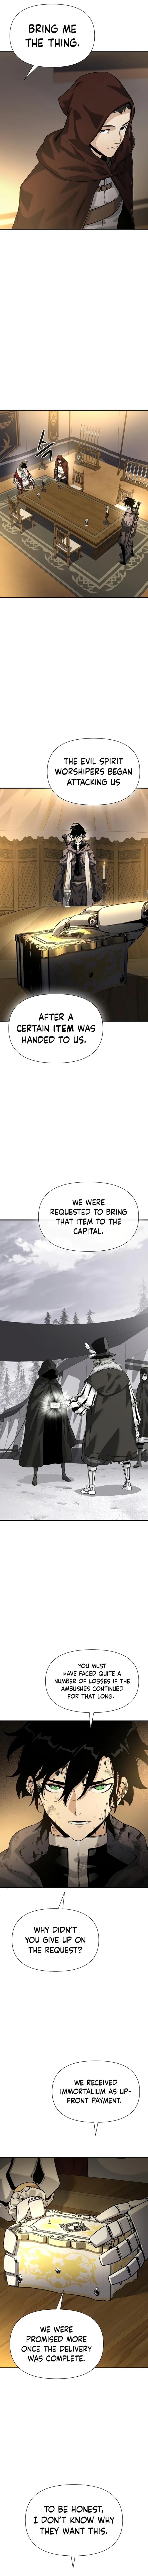 The Priest of Corruption - Chapter 27 Page 7